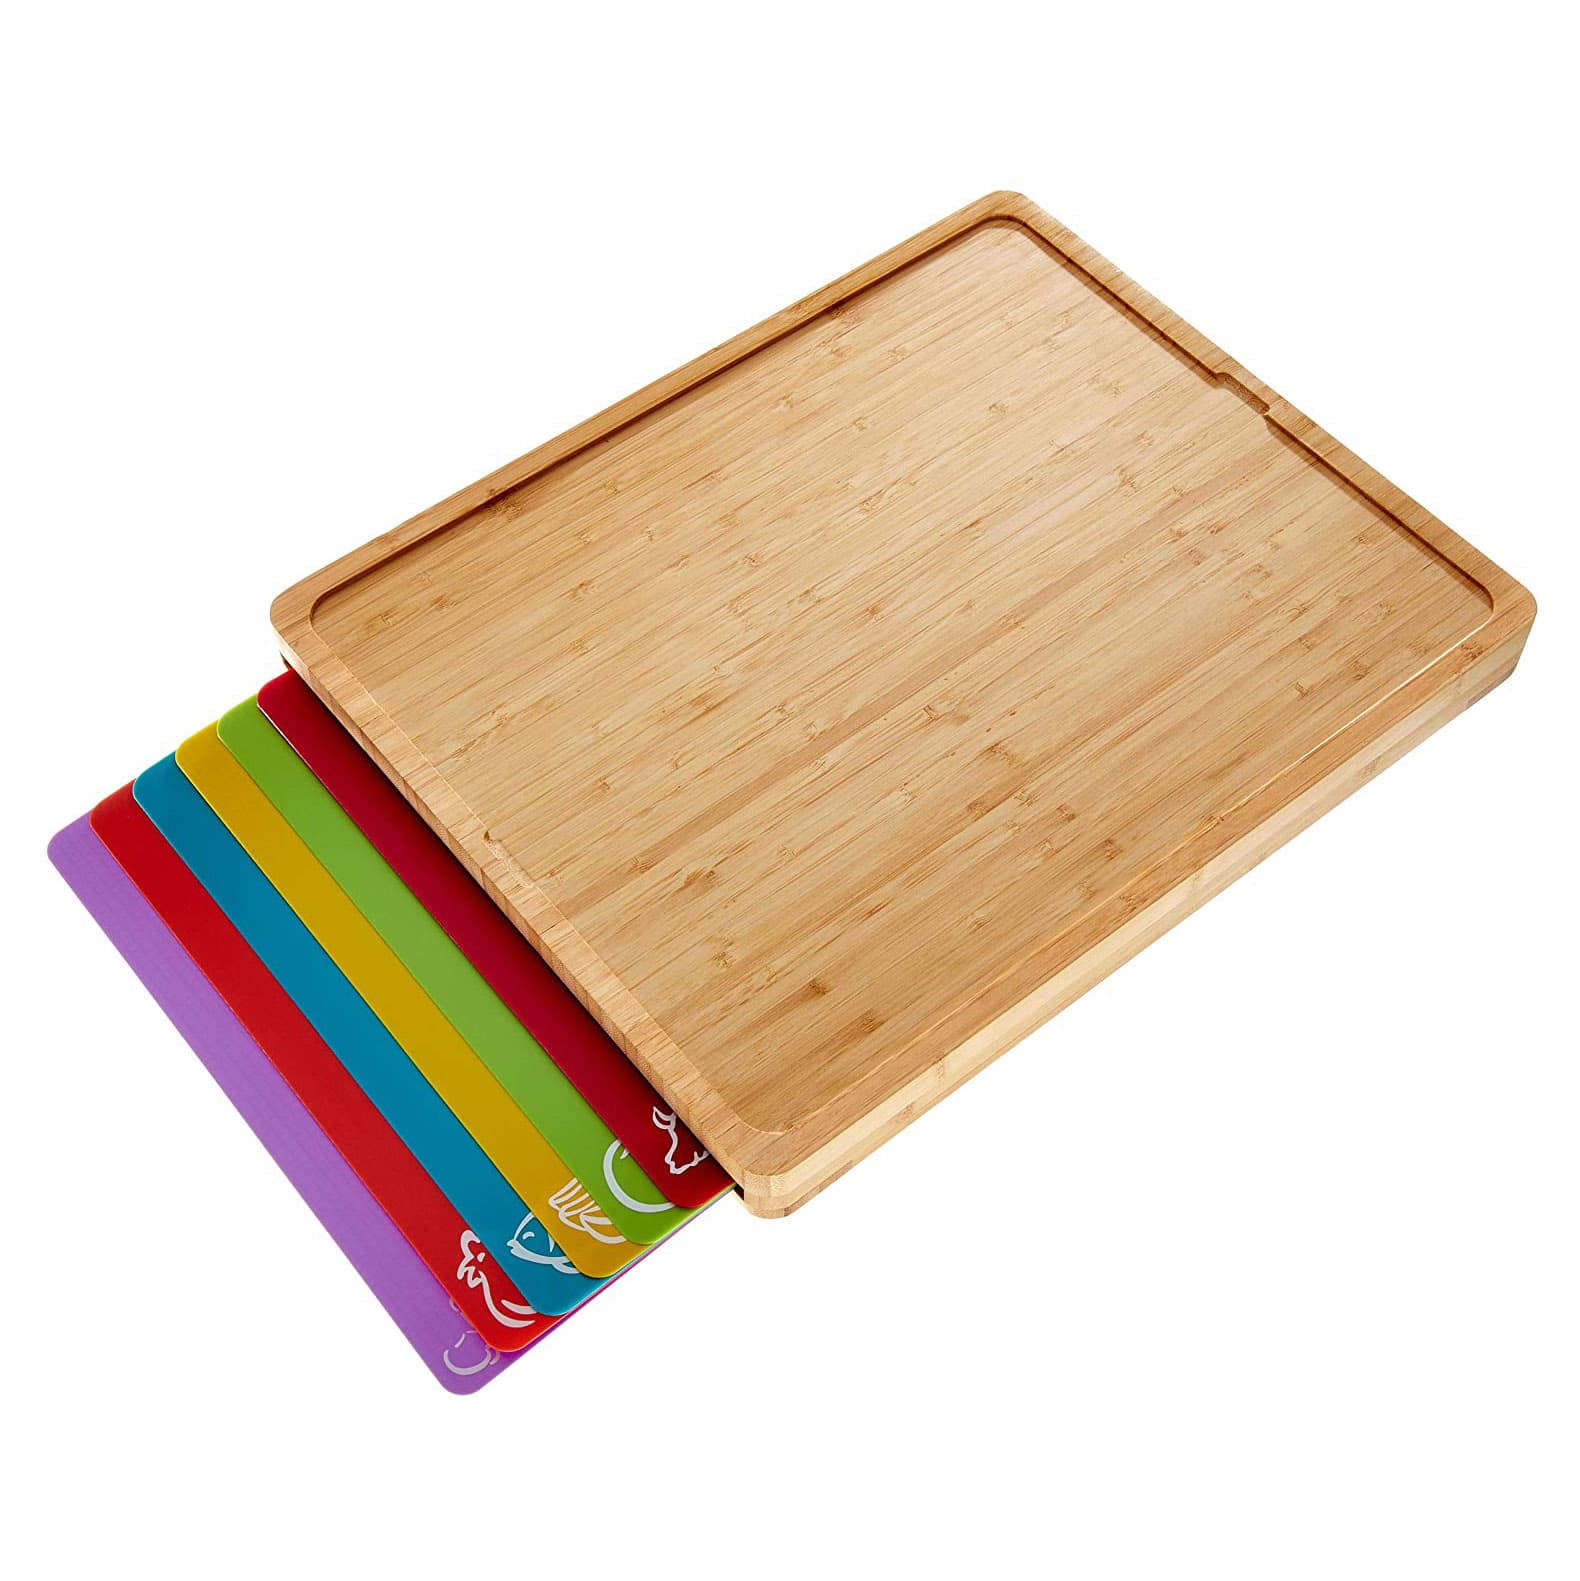 How To Clean Plastic, Wood, and Bamboo Cutting Boards—Naturally.